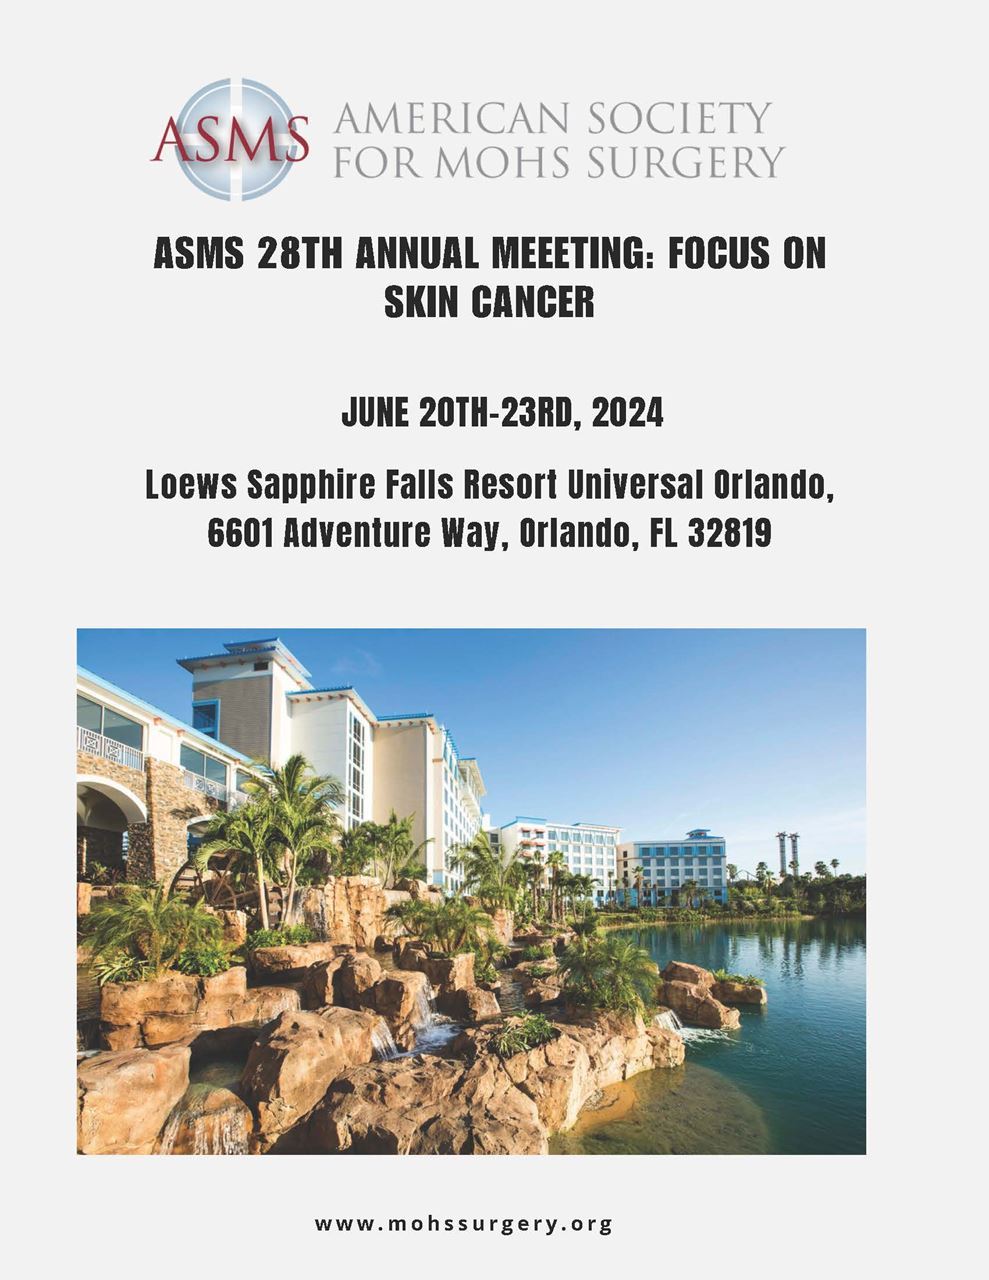 American Society for Mohs Surgery ASMS 28th Annual Meeting Focus on